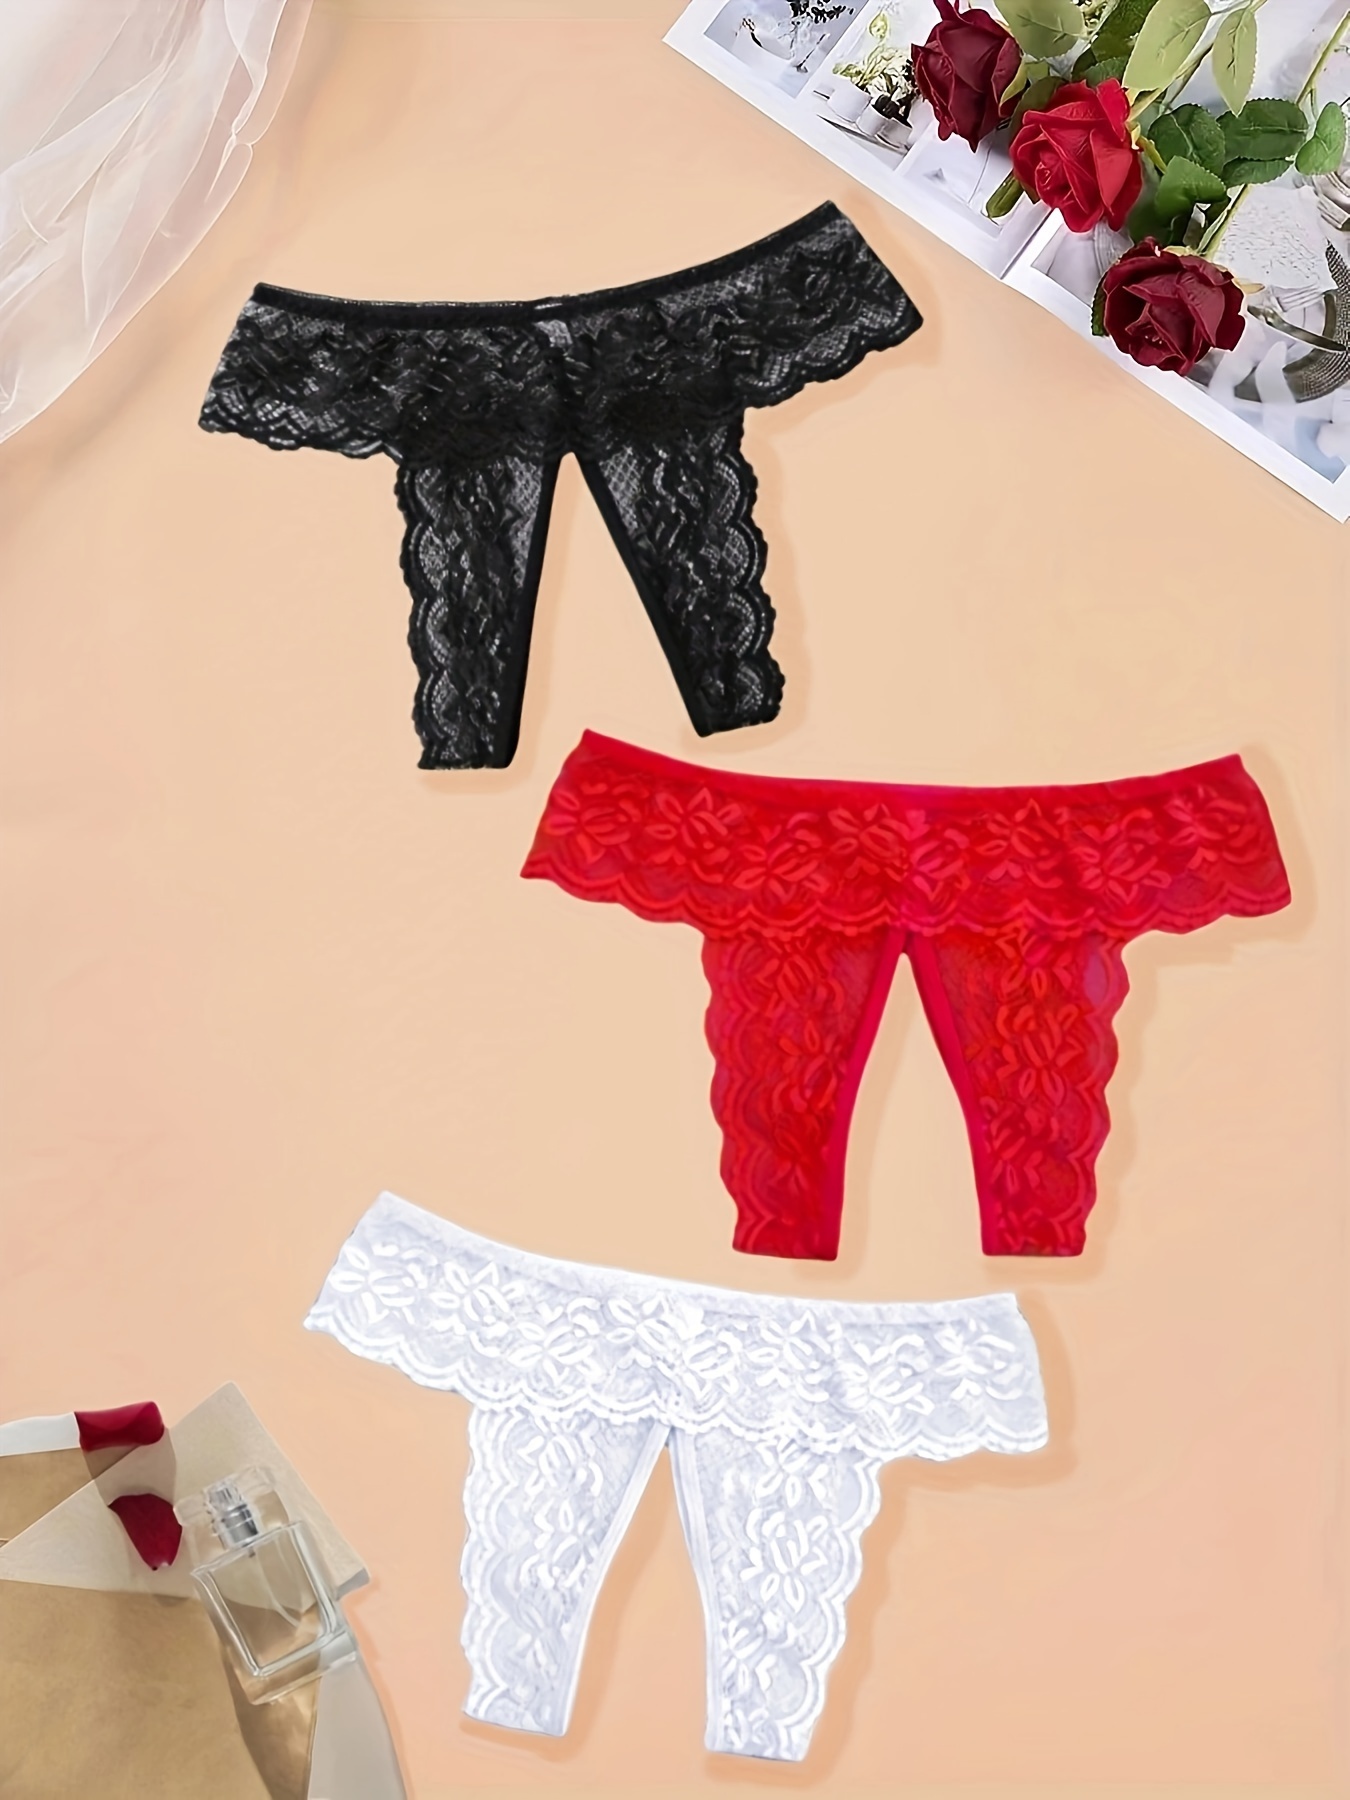 Red and Black Scalloped Lace Open Crotch Tanga Crotchless Panties